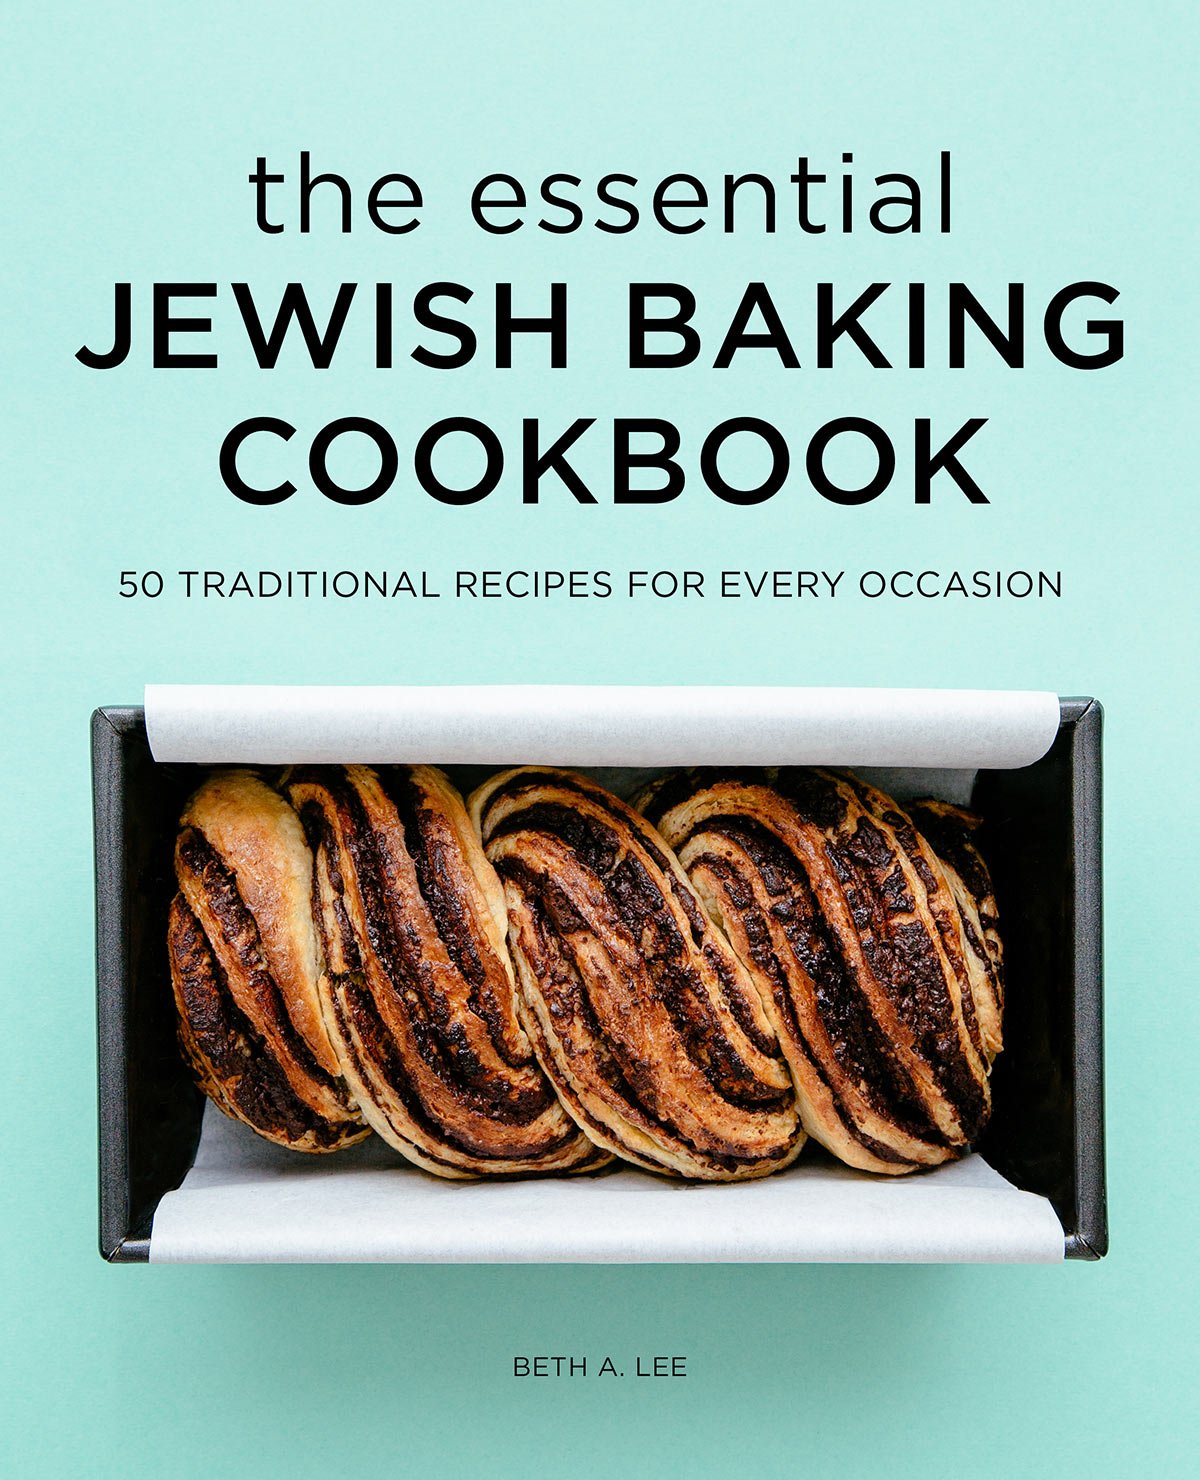 Photo of the cover of the essential Jewish baking cookbook by Beth Lee.